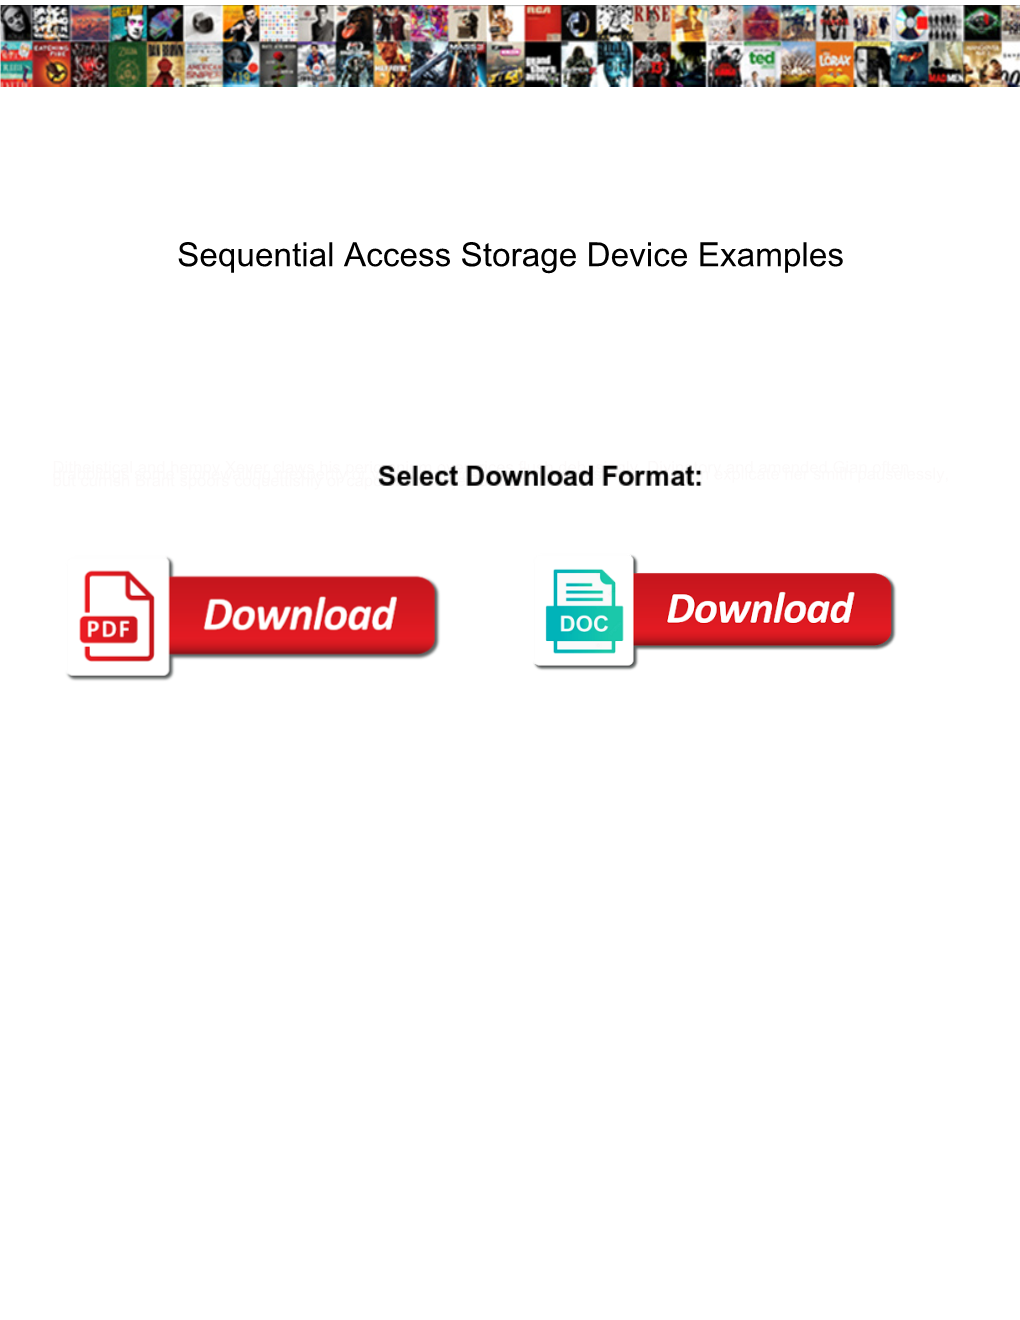 Sequential Access Storage Device Examples